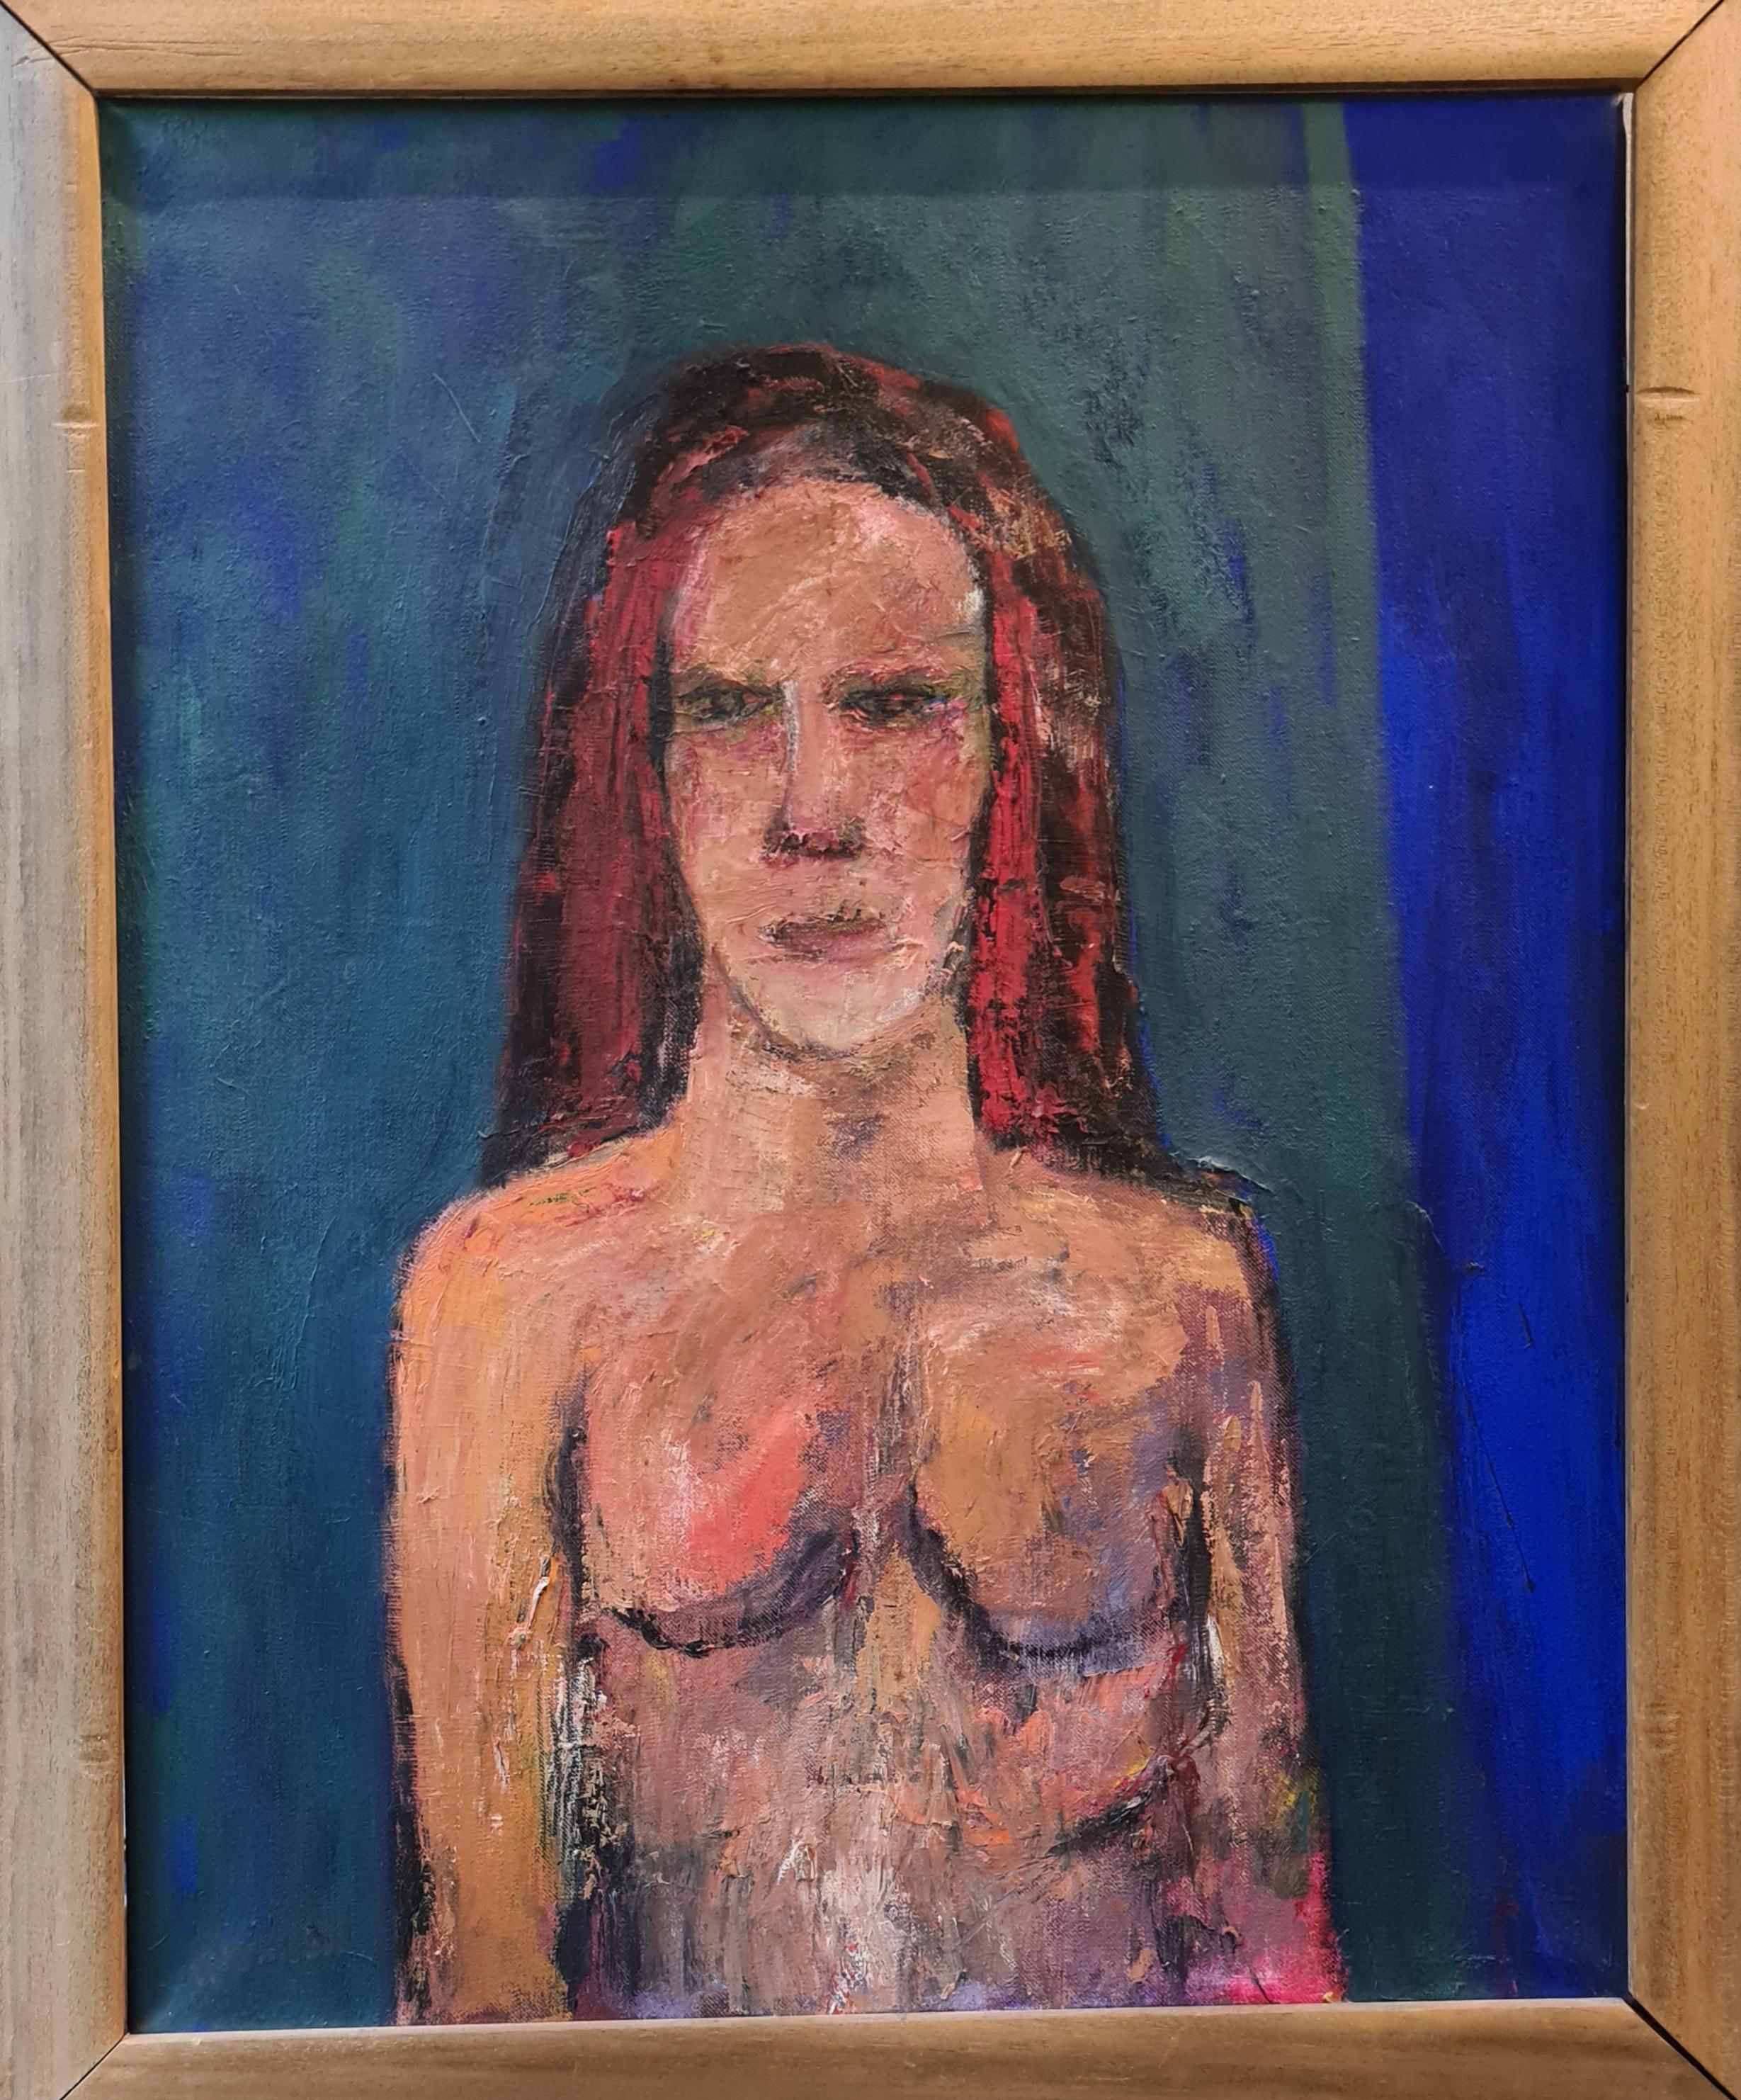 Douglas Thomson Nude Painting - Expressionist Female Nude Portrait, 'The Green Curtain' Oil on Canvas.